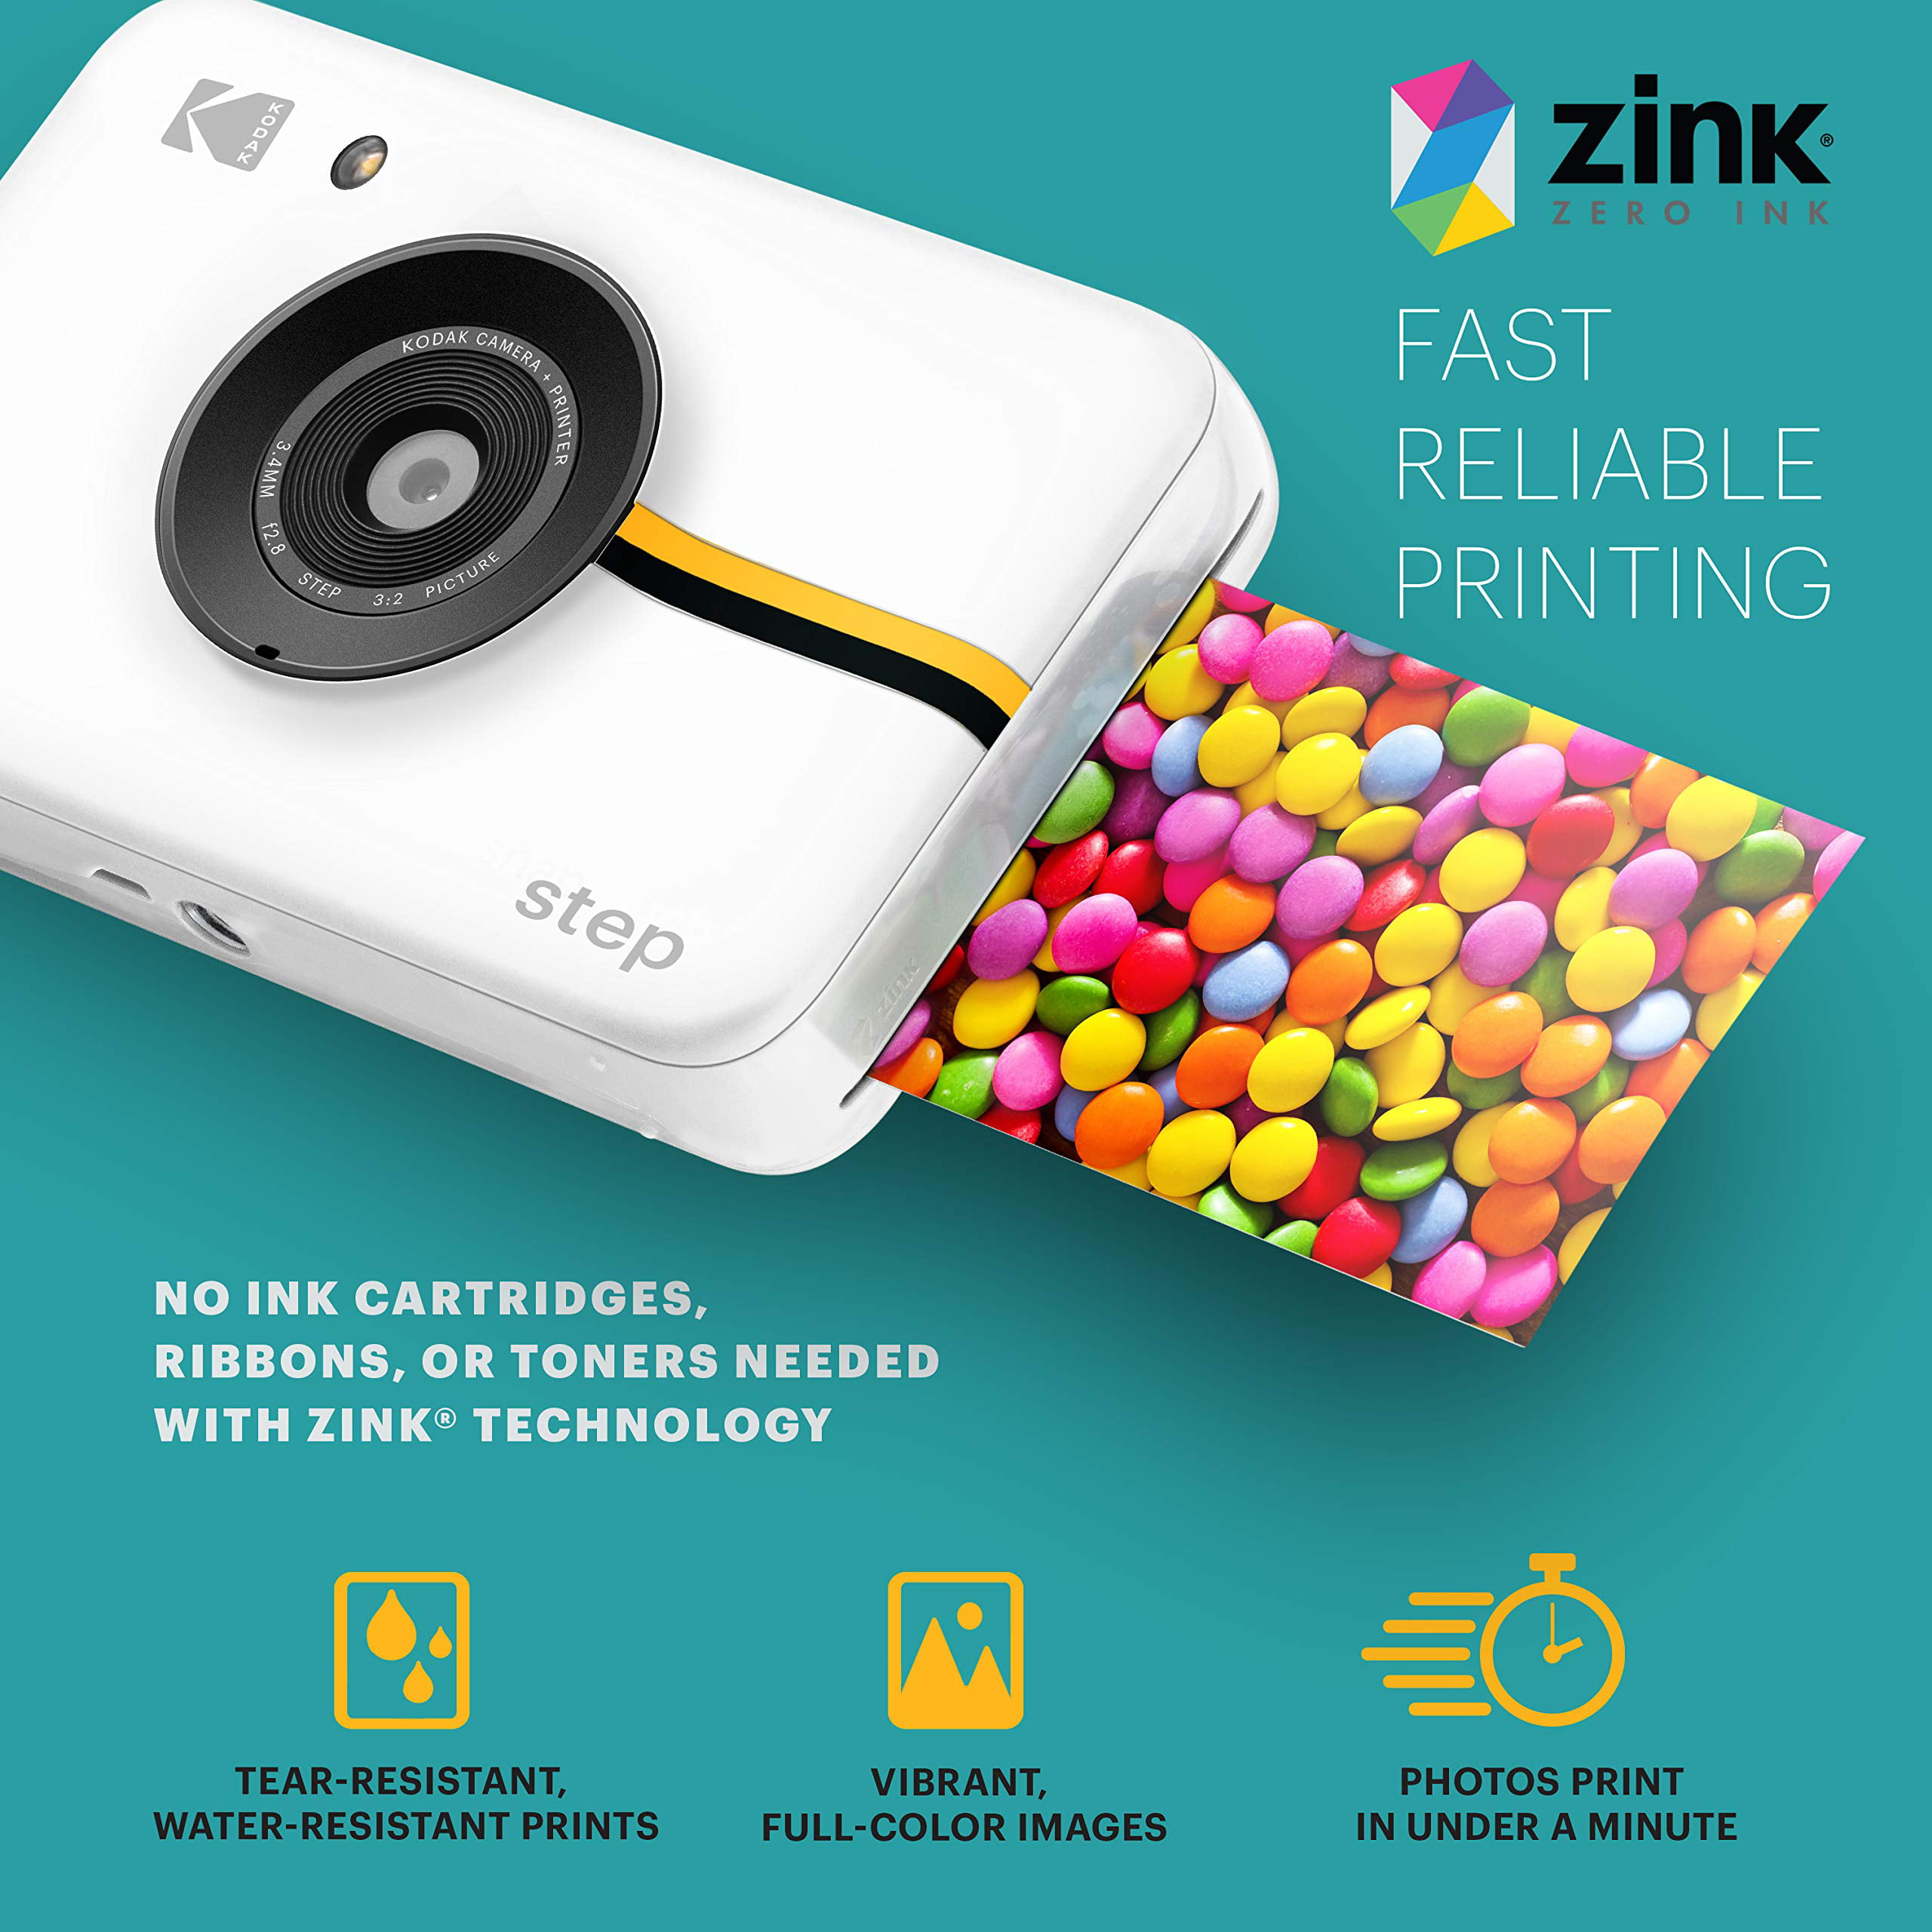 The Kodak Step Touch instant camera does more than just print